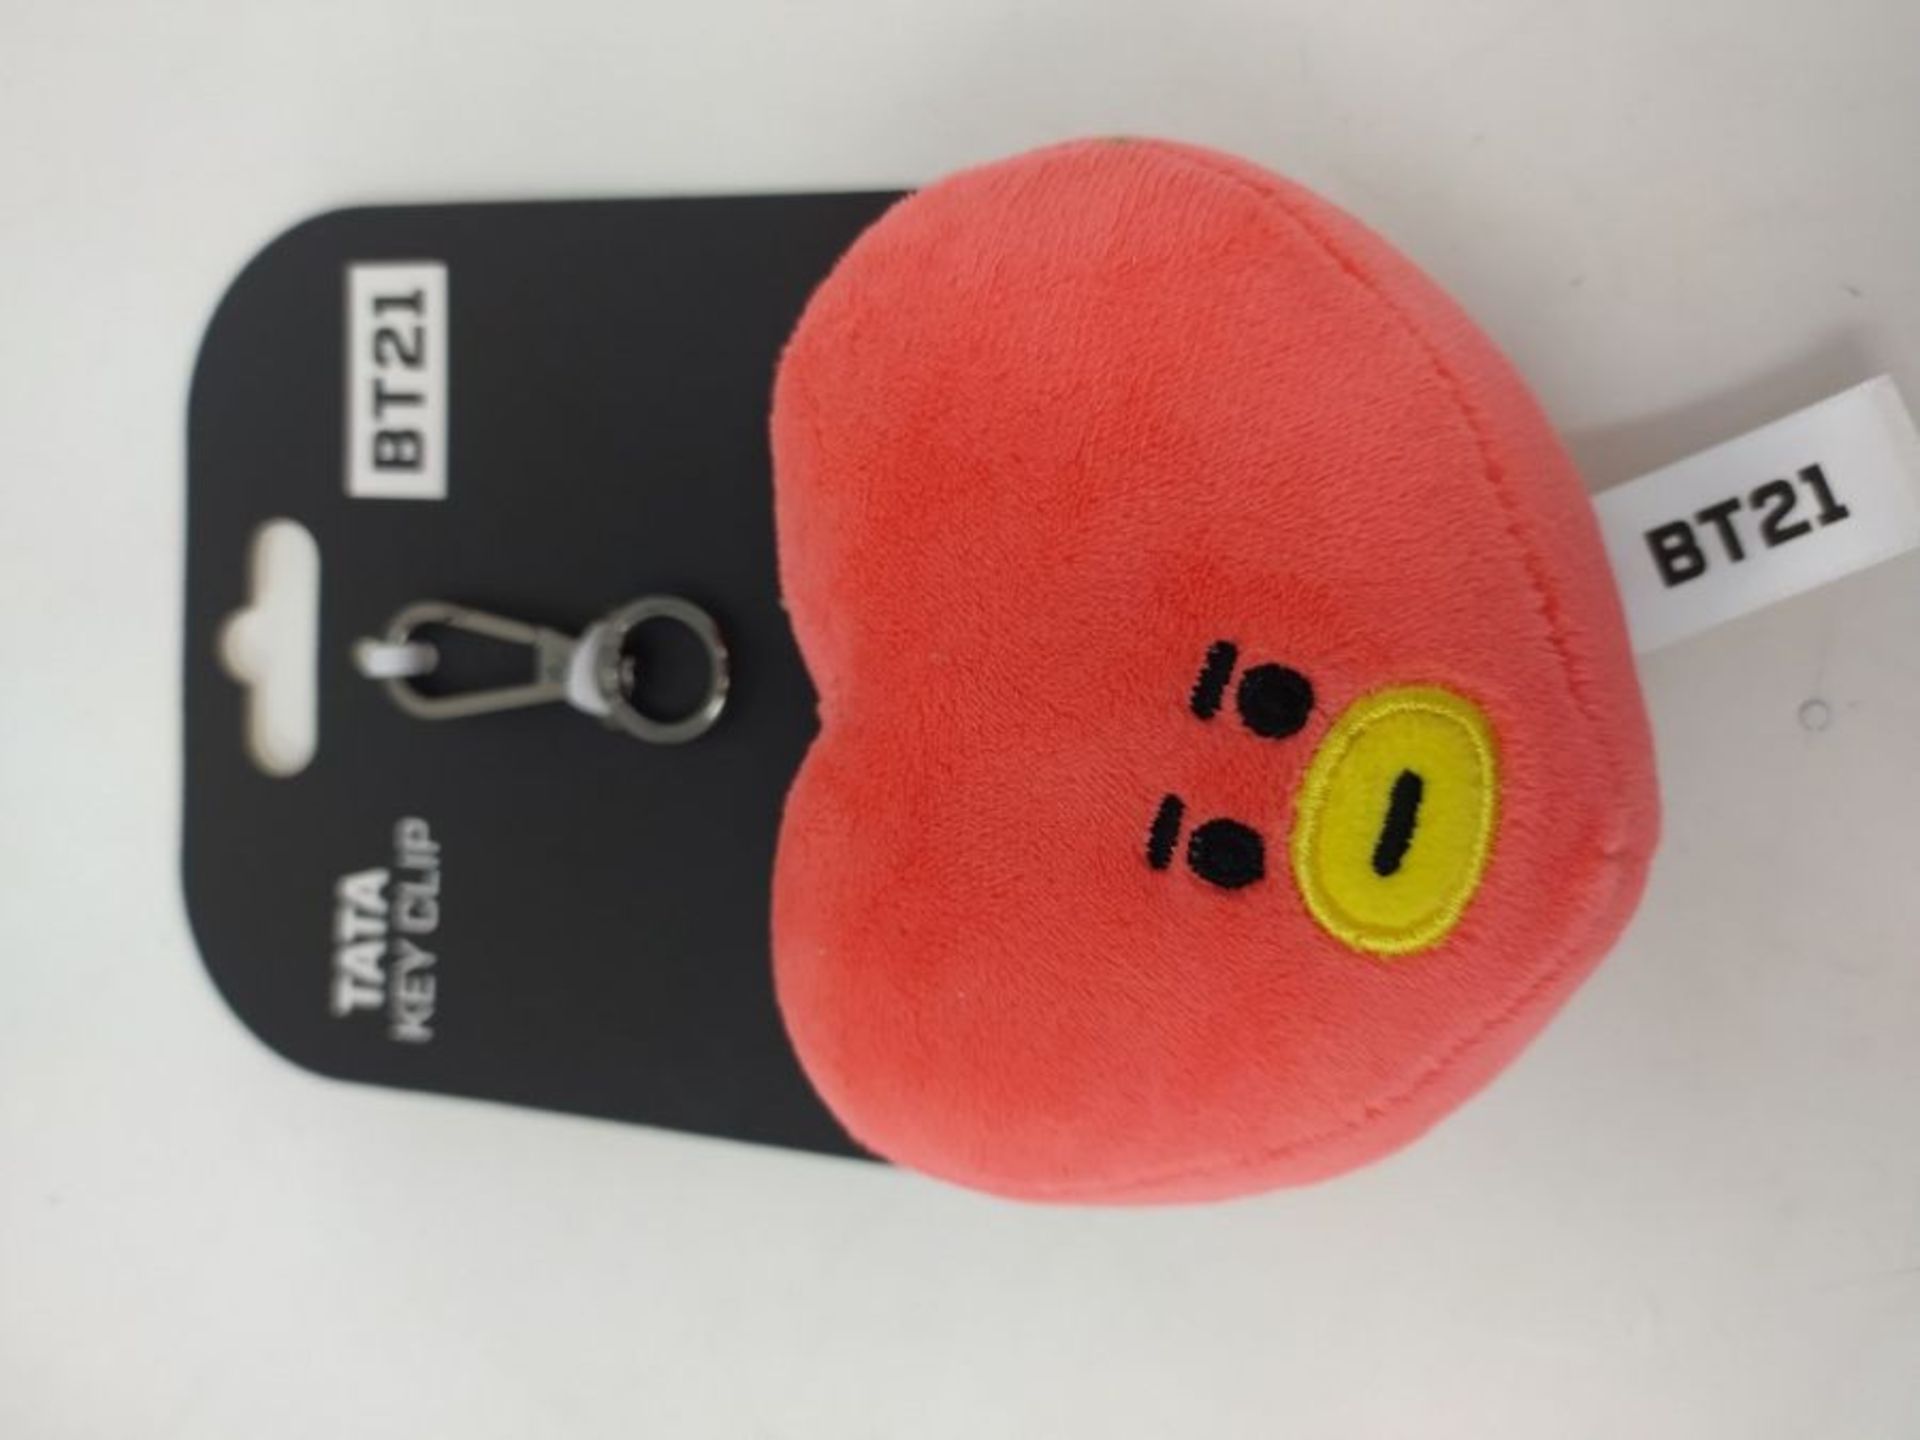 AURORA BT21 Official Merchandise, TATA Plush Key Clip, 61335, Blue and Red - Image 2 of 2